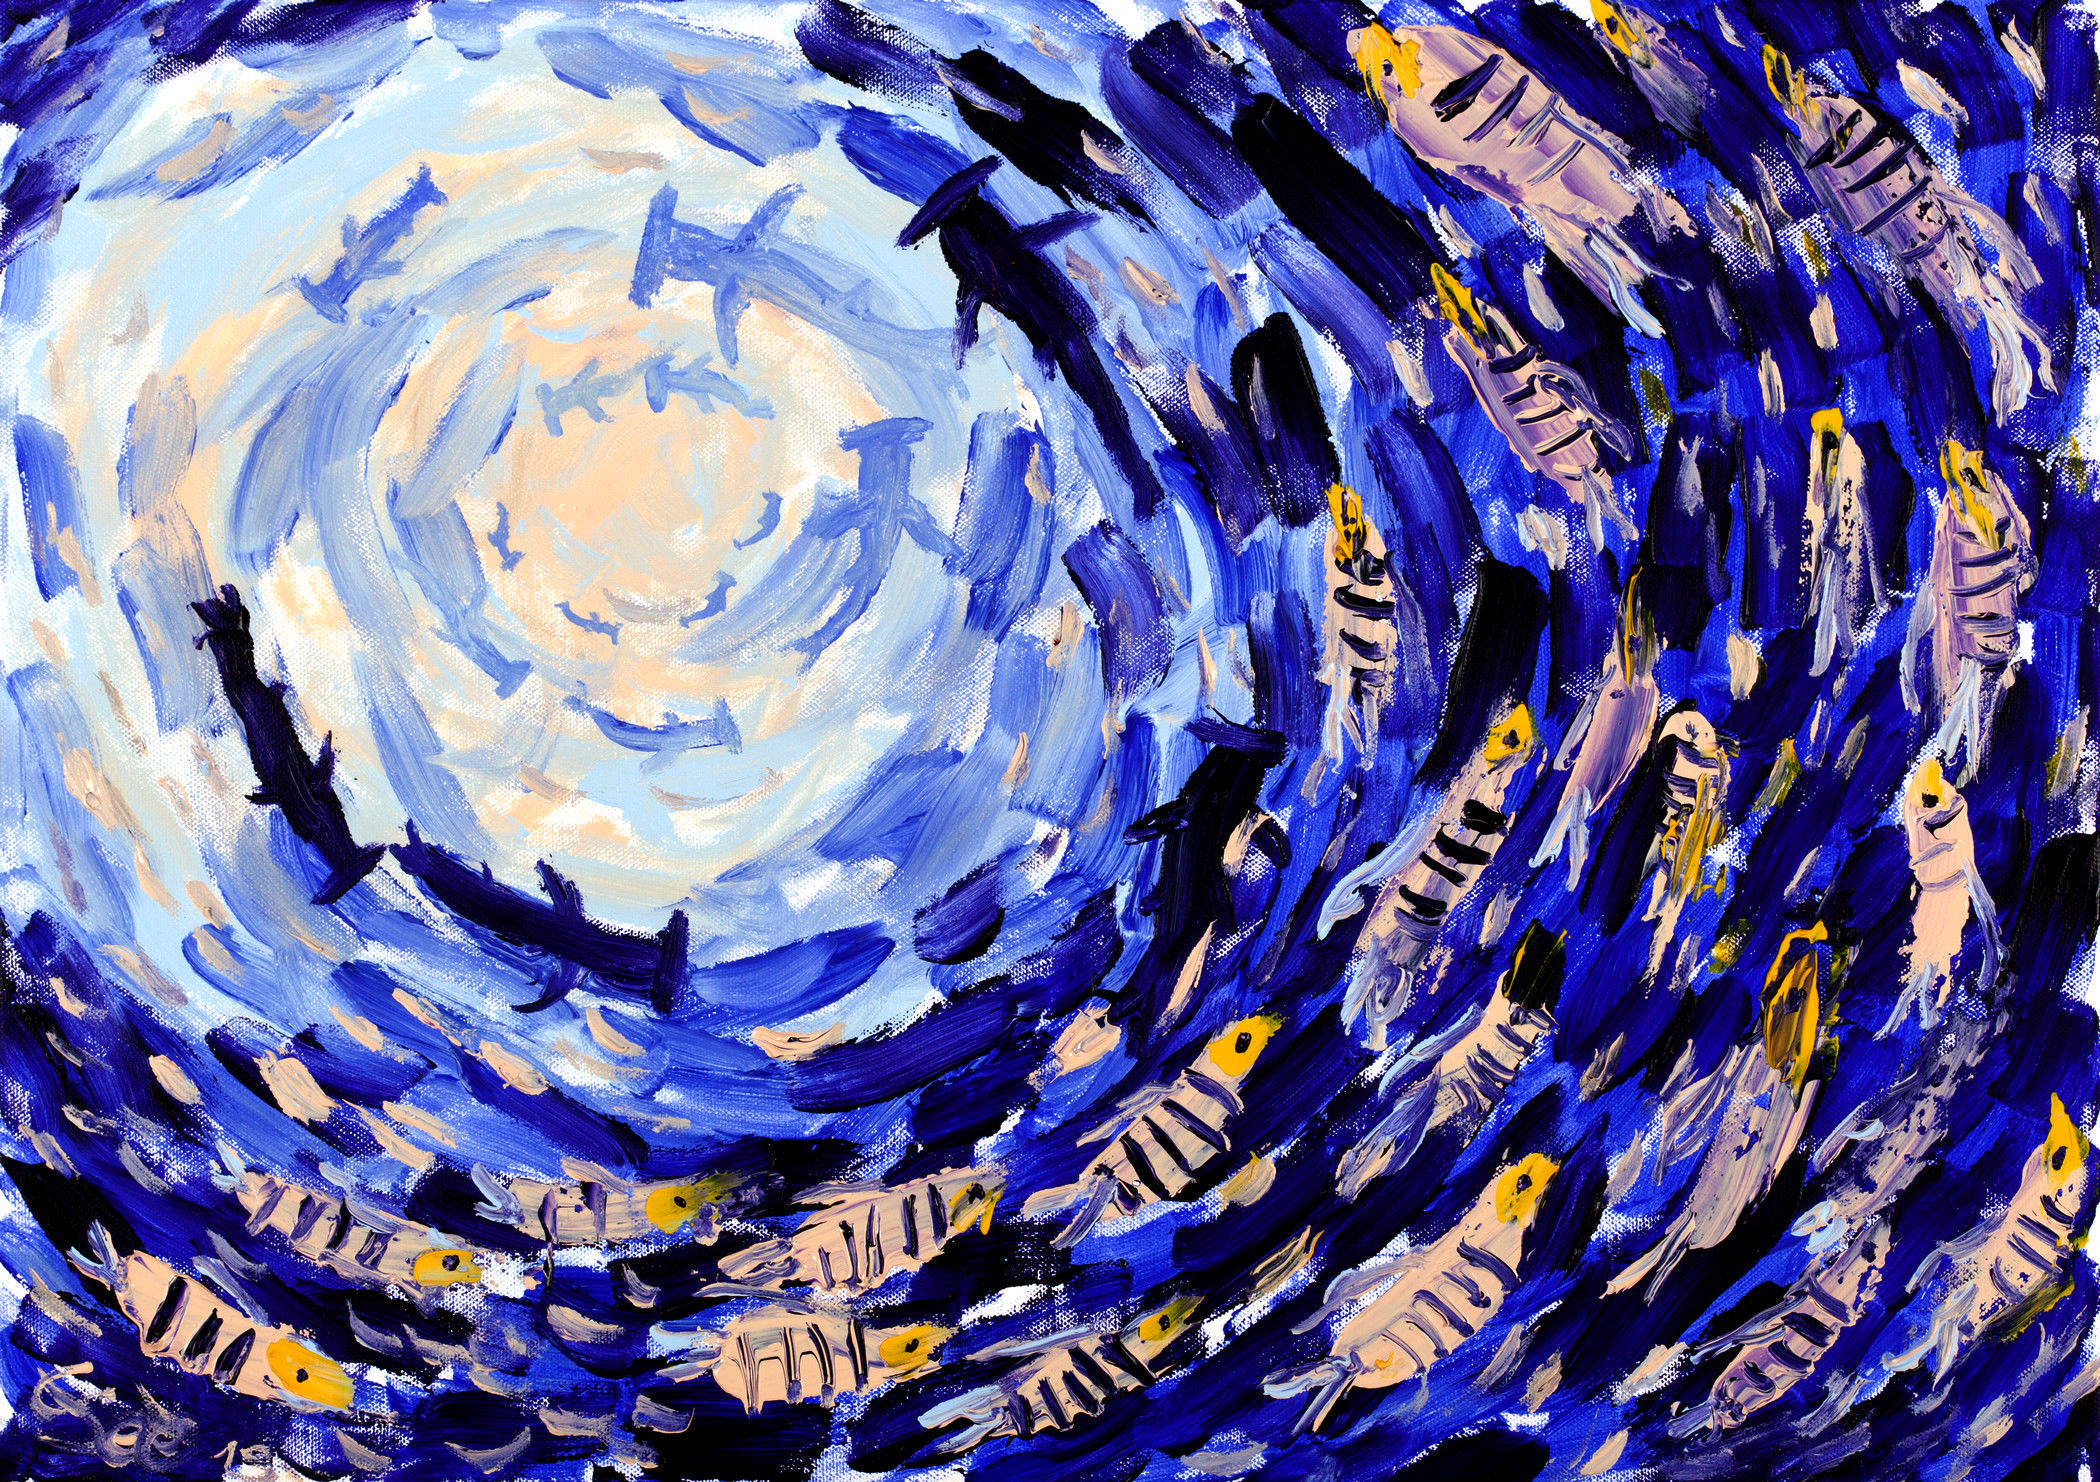 Circling school of fish, oil painting by Christian Seebauer